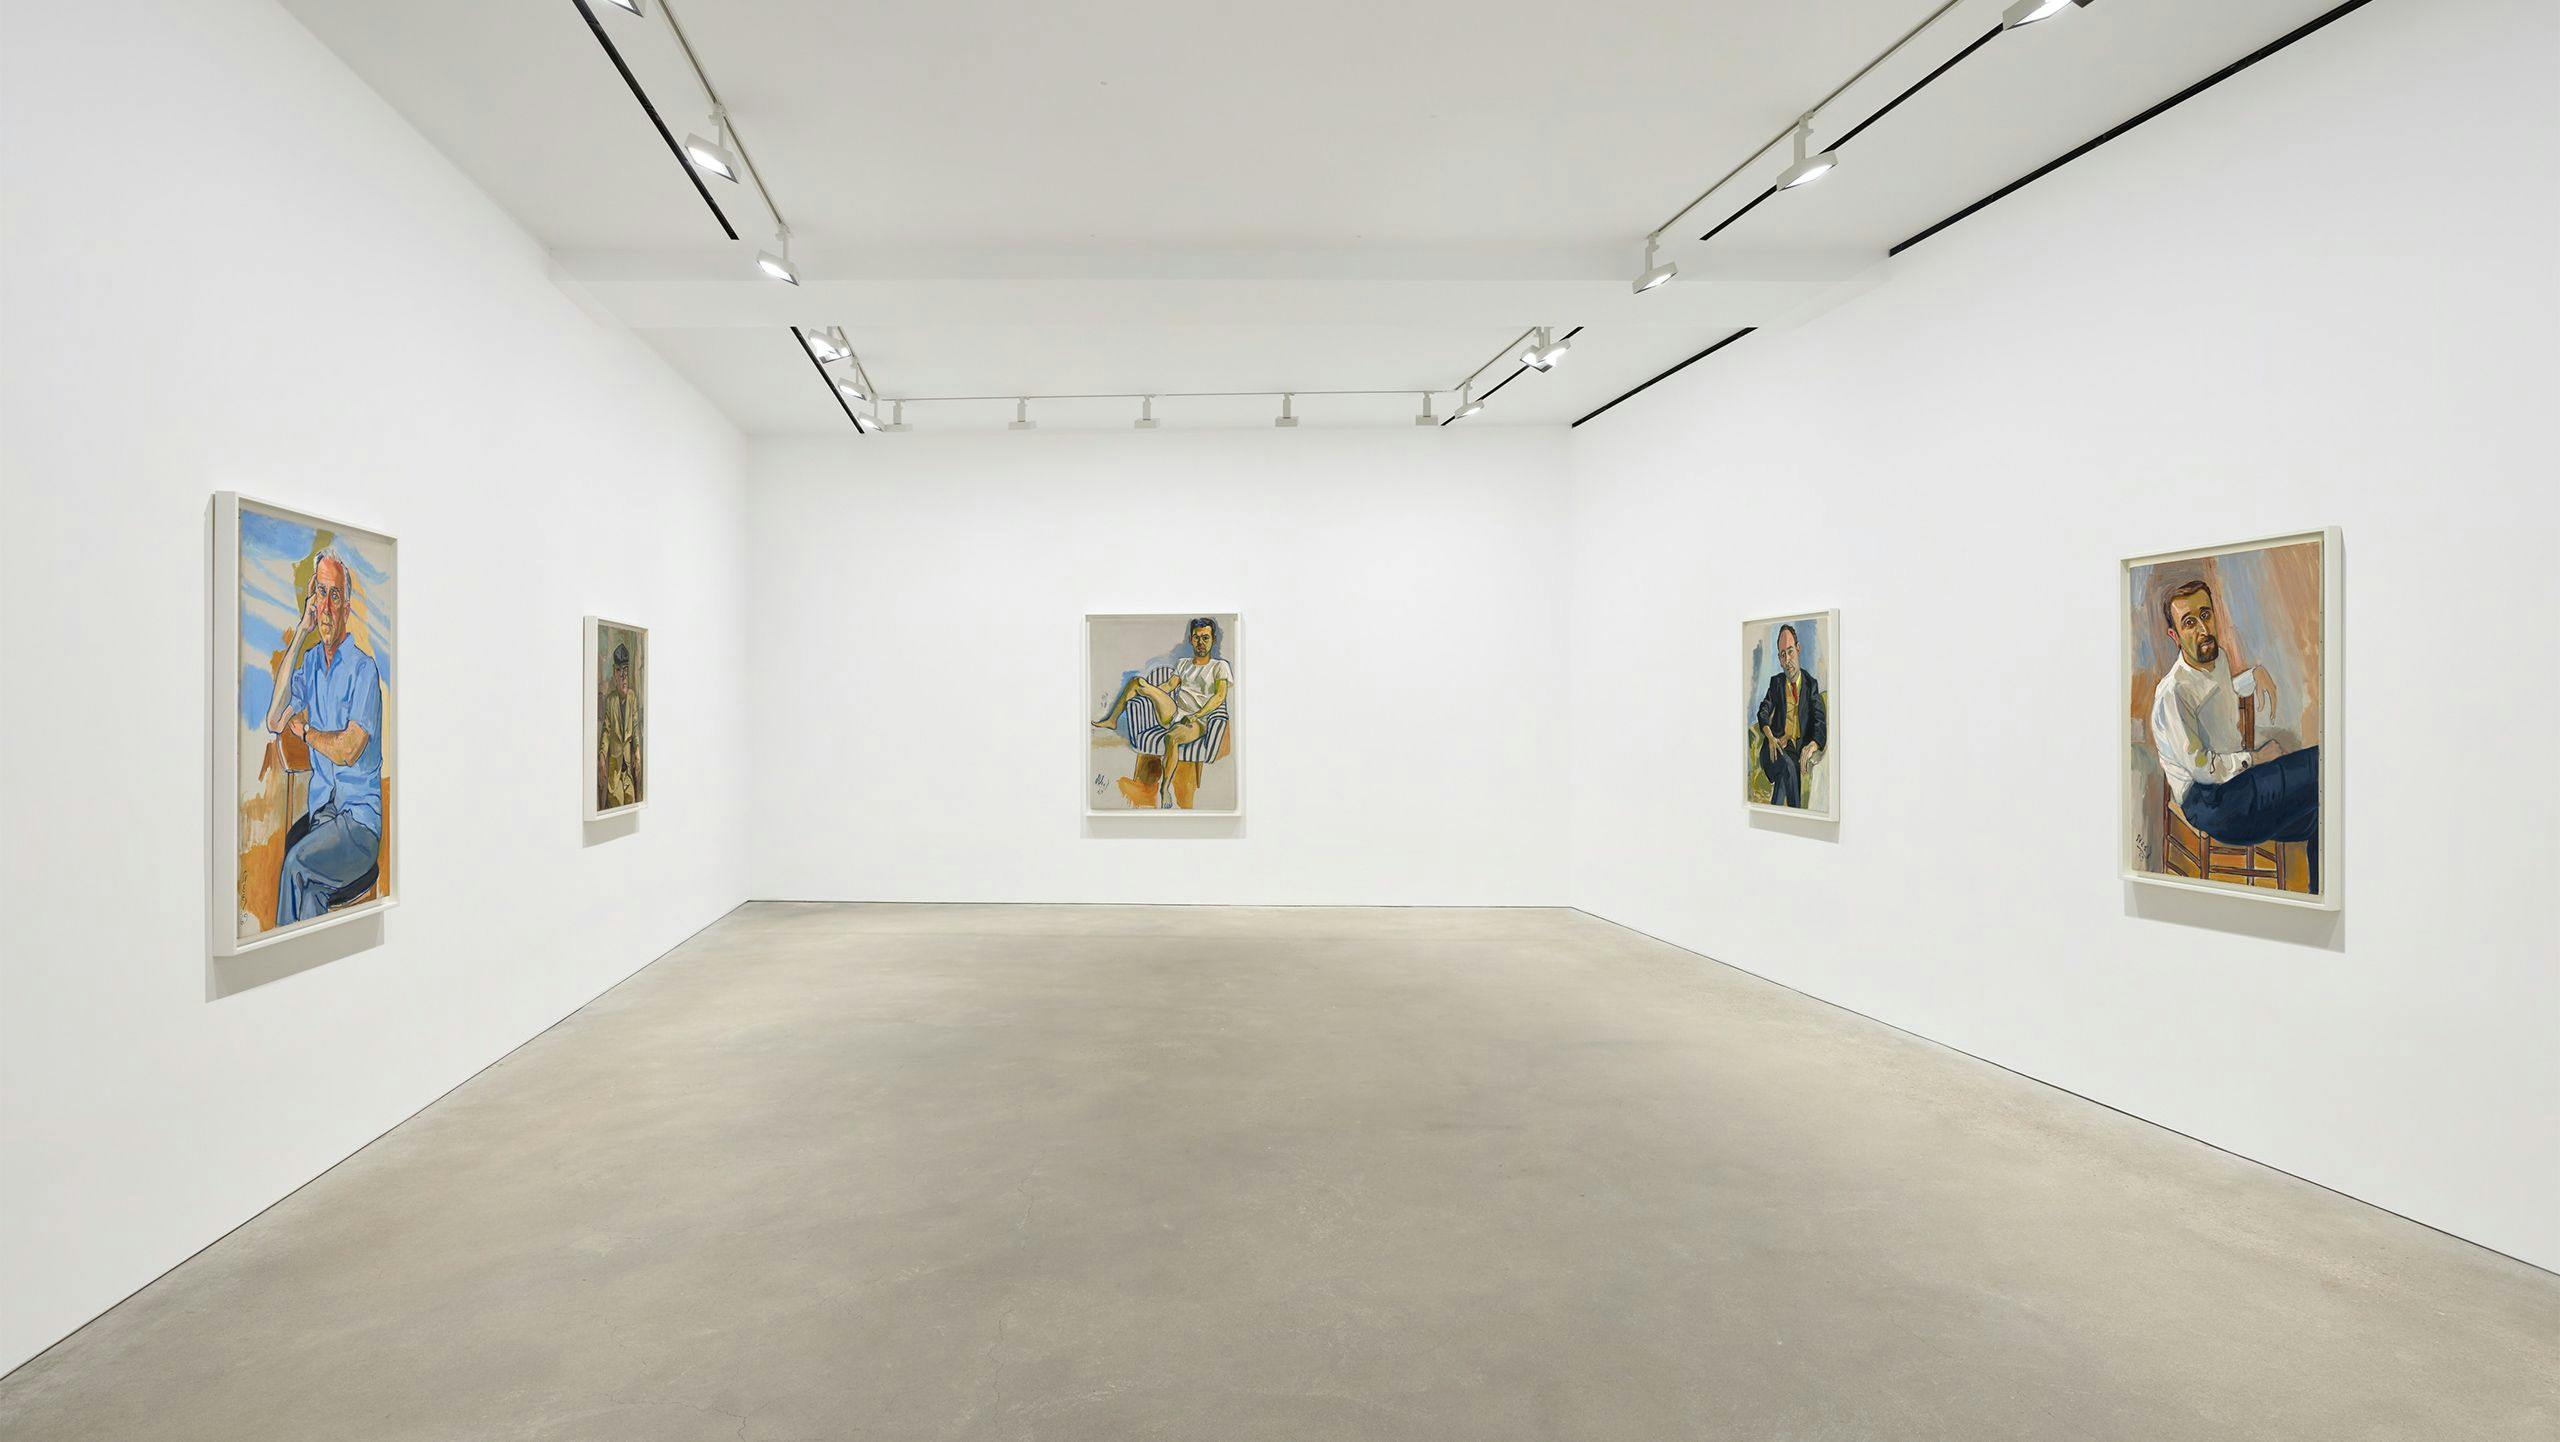 An installation view of the exhibition, Alice Neel: Men from the Sixties, at David Zwirner in Hong Kong, dated 2022.